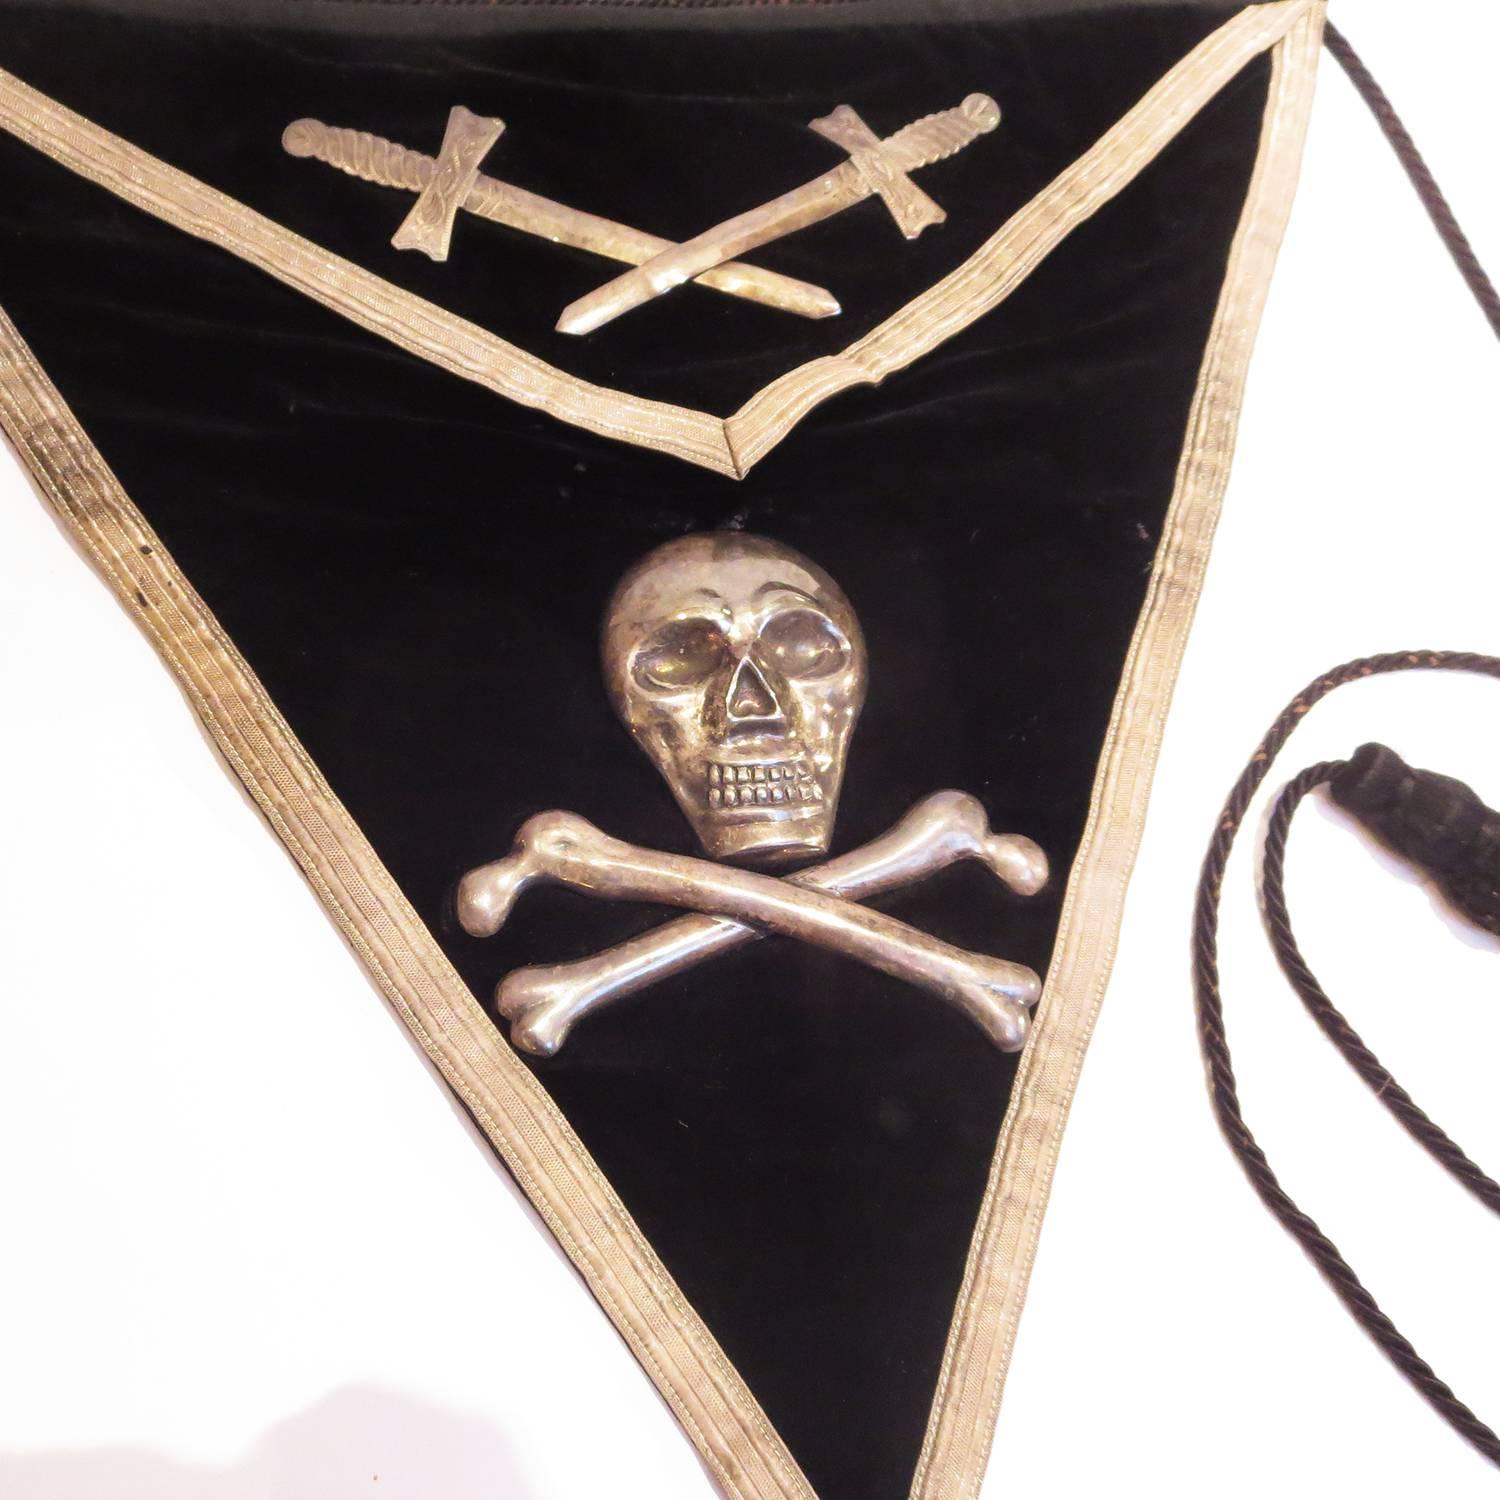 Dating from the late 1800's, this black velvet apron was worn by the Knights Templar of the Masonic fraternity for ceremonial meetings. The apron is all original, and in very nice condition, including the sterling silver skull, crossbones, and